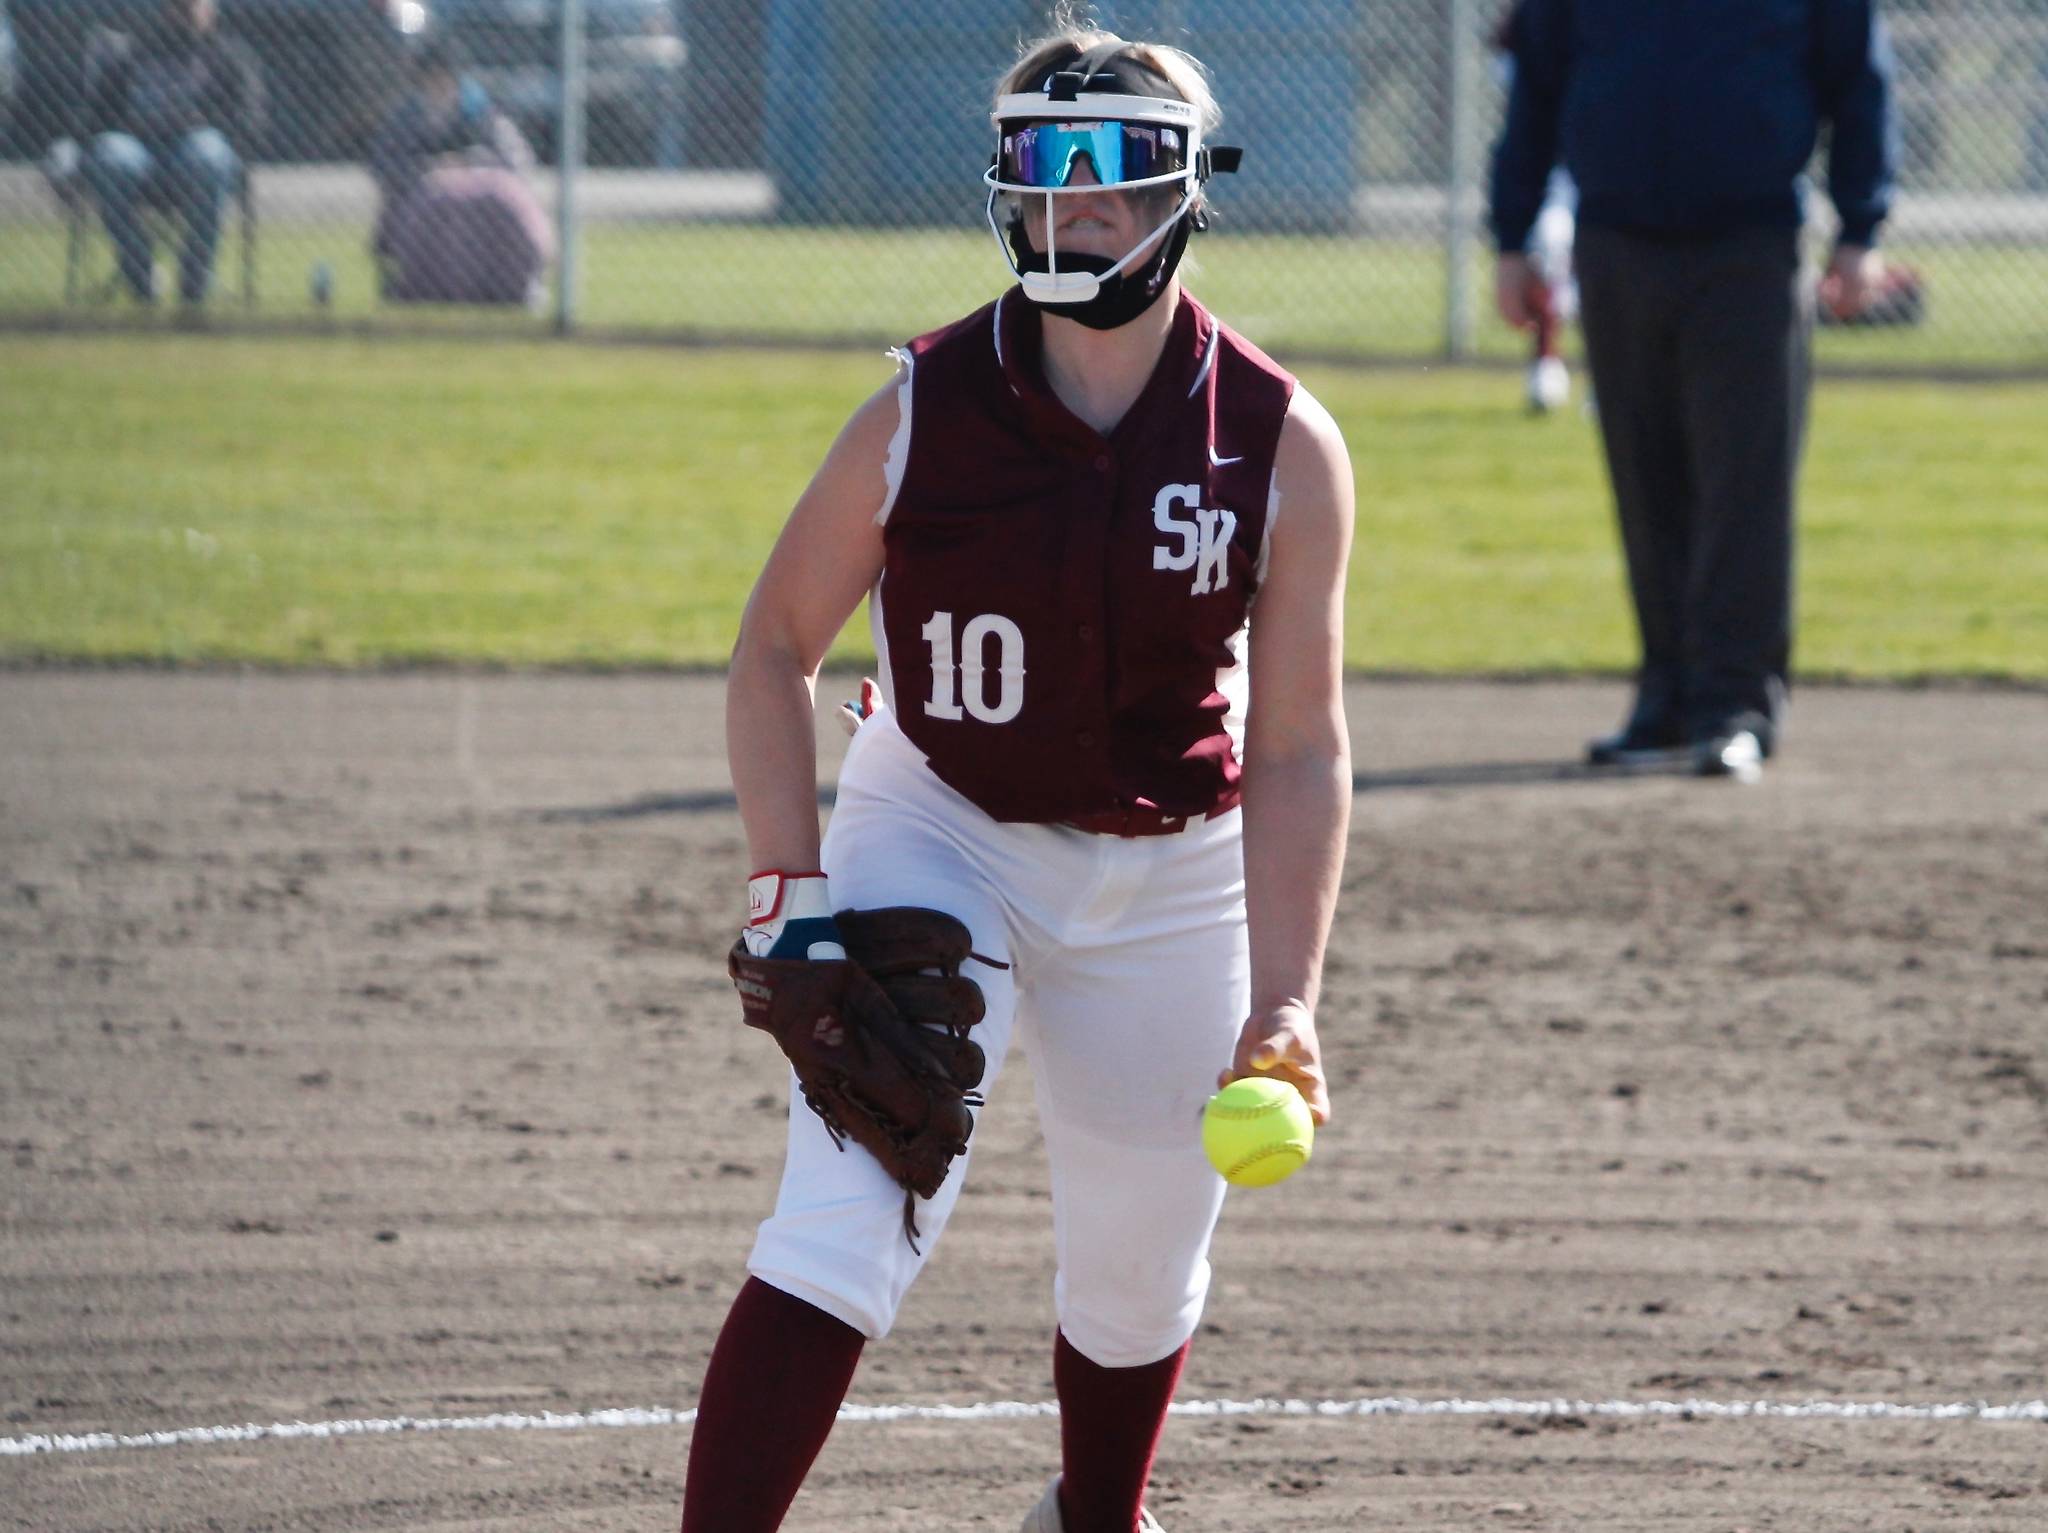 Brooke Jett threw four no-hit innings for the Wolves against Curtis. She also hit a two-run home run. (Mark Krulish/Kitsap News Group)